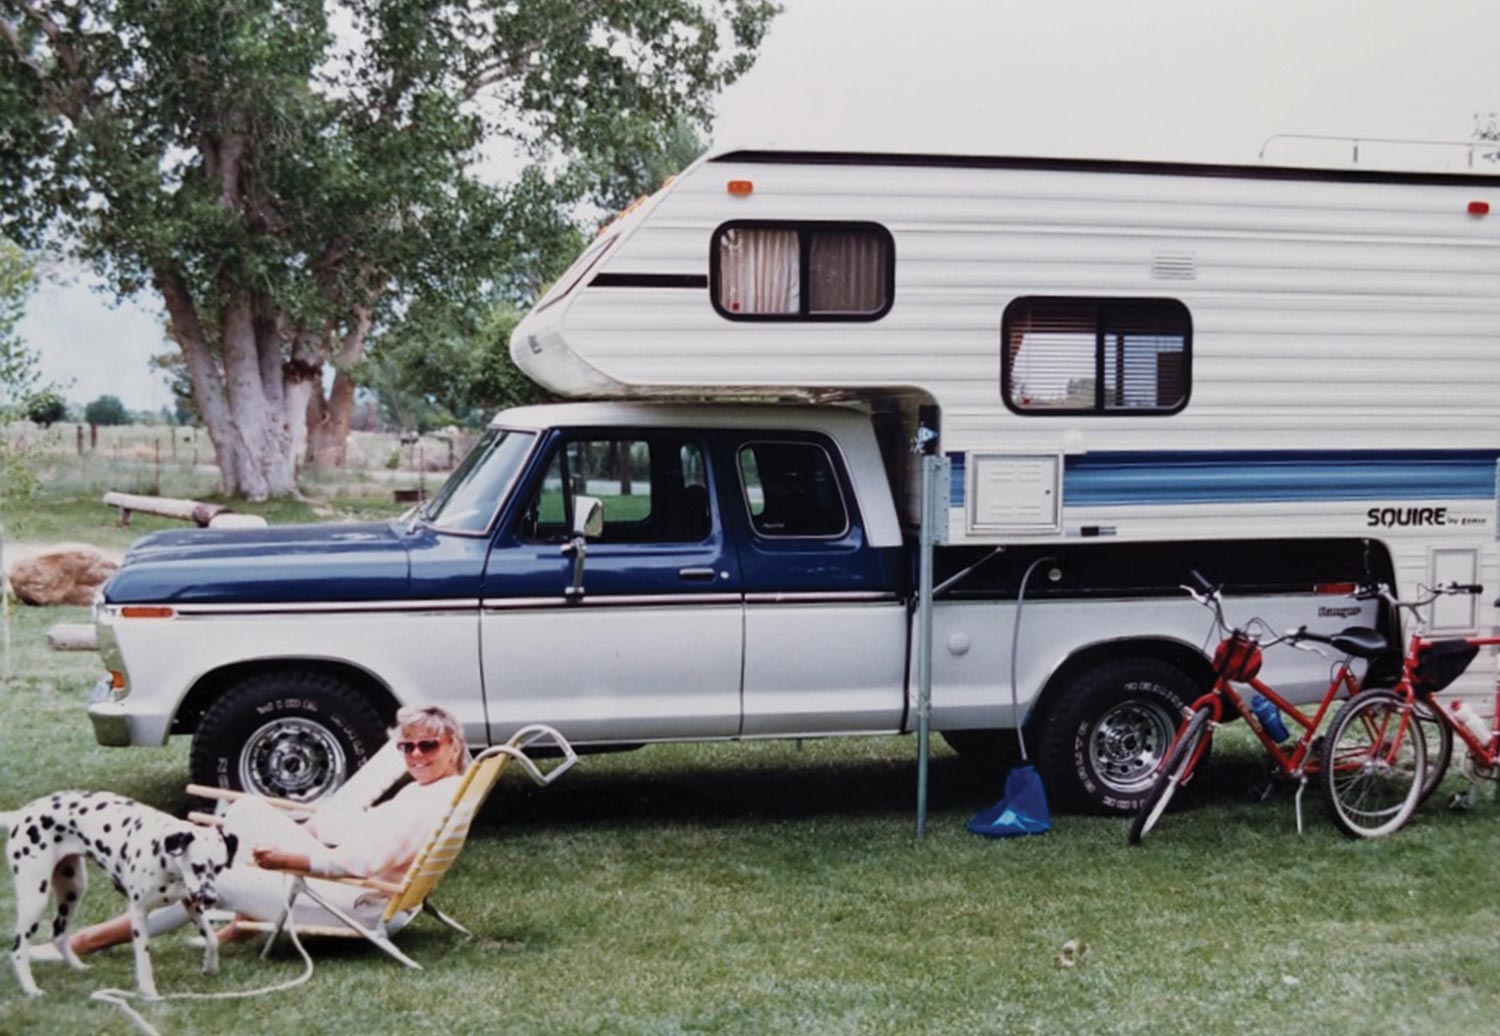 an old dated looking photo of the ’75 Ford SuperCab with a trunk trailer parked on a grassy yard as a woman sits in a lawn chair smiling next to a Dalmatian